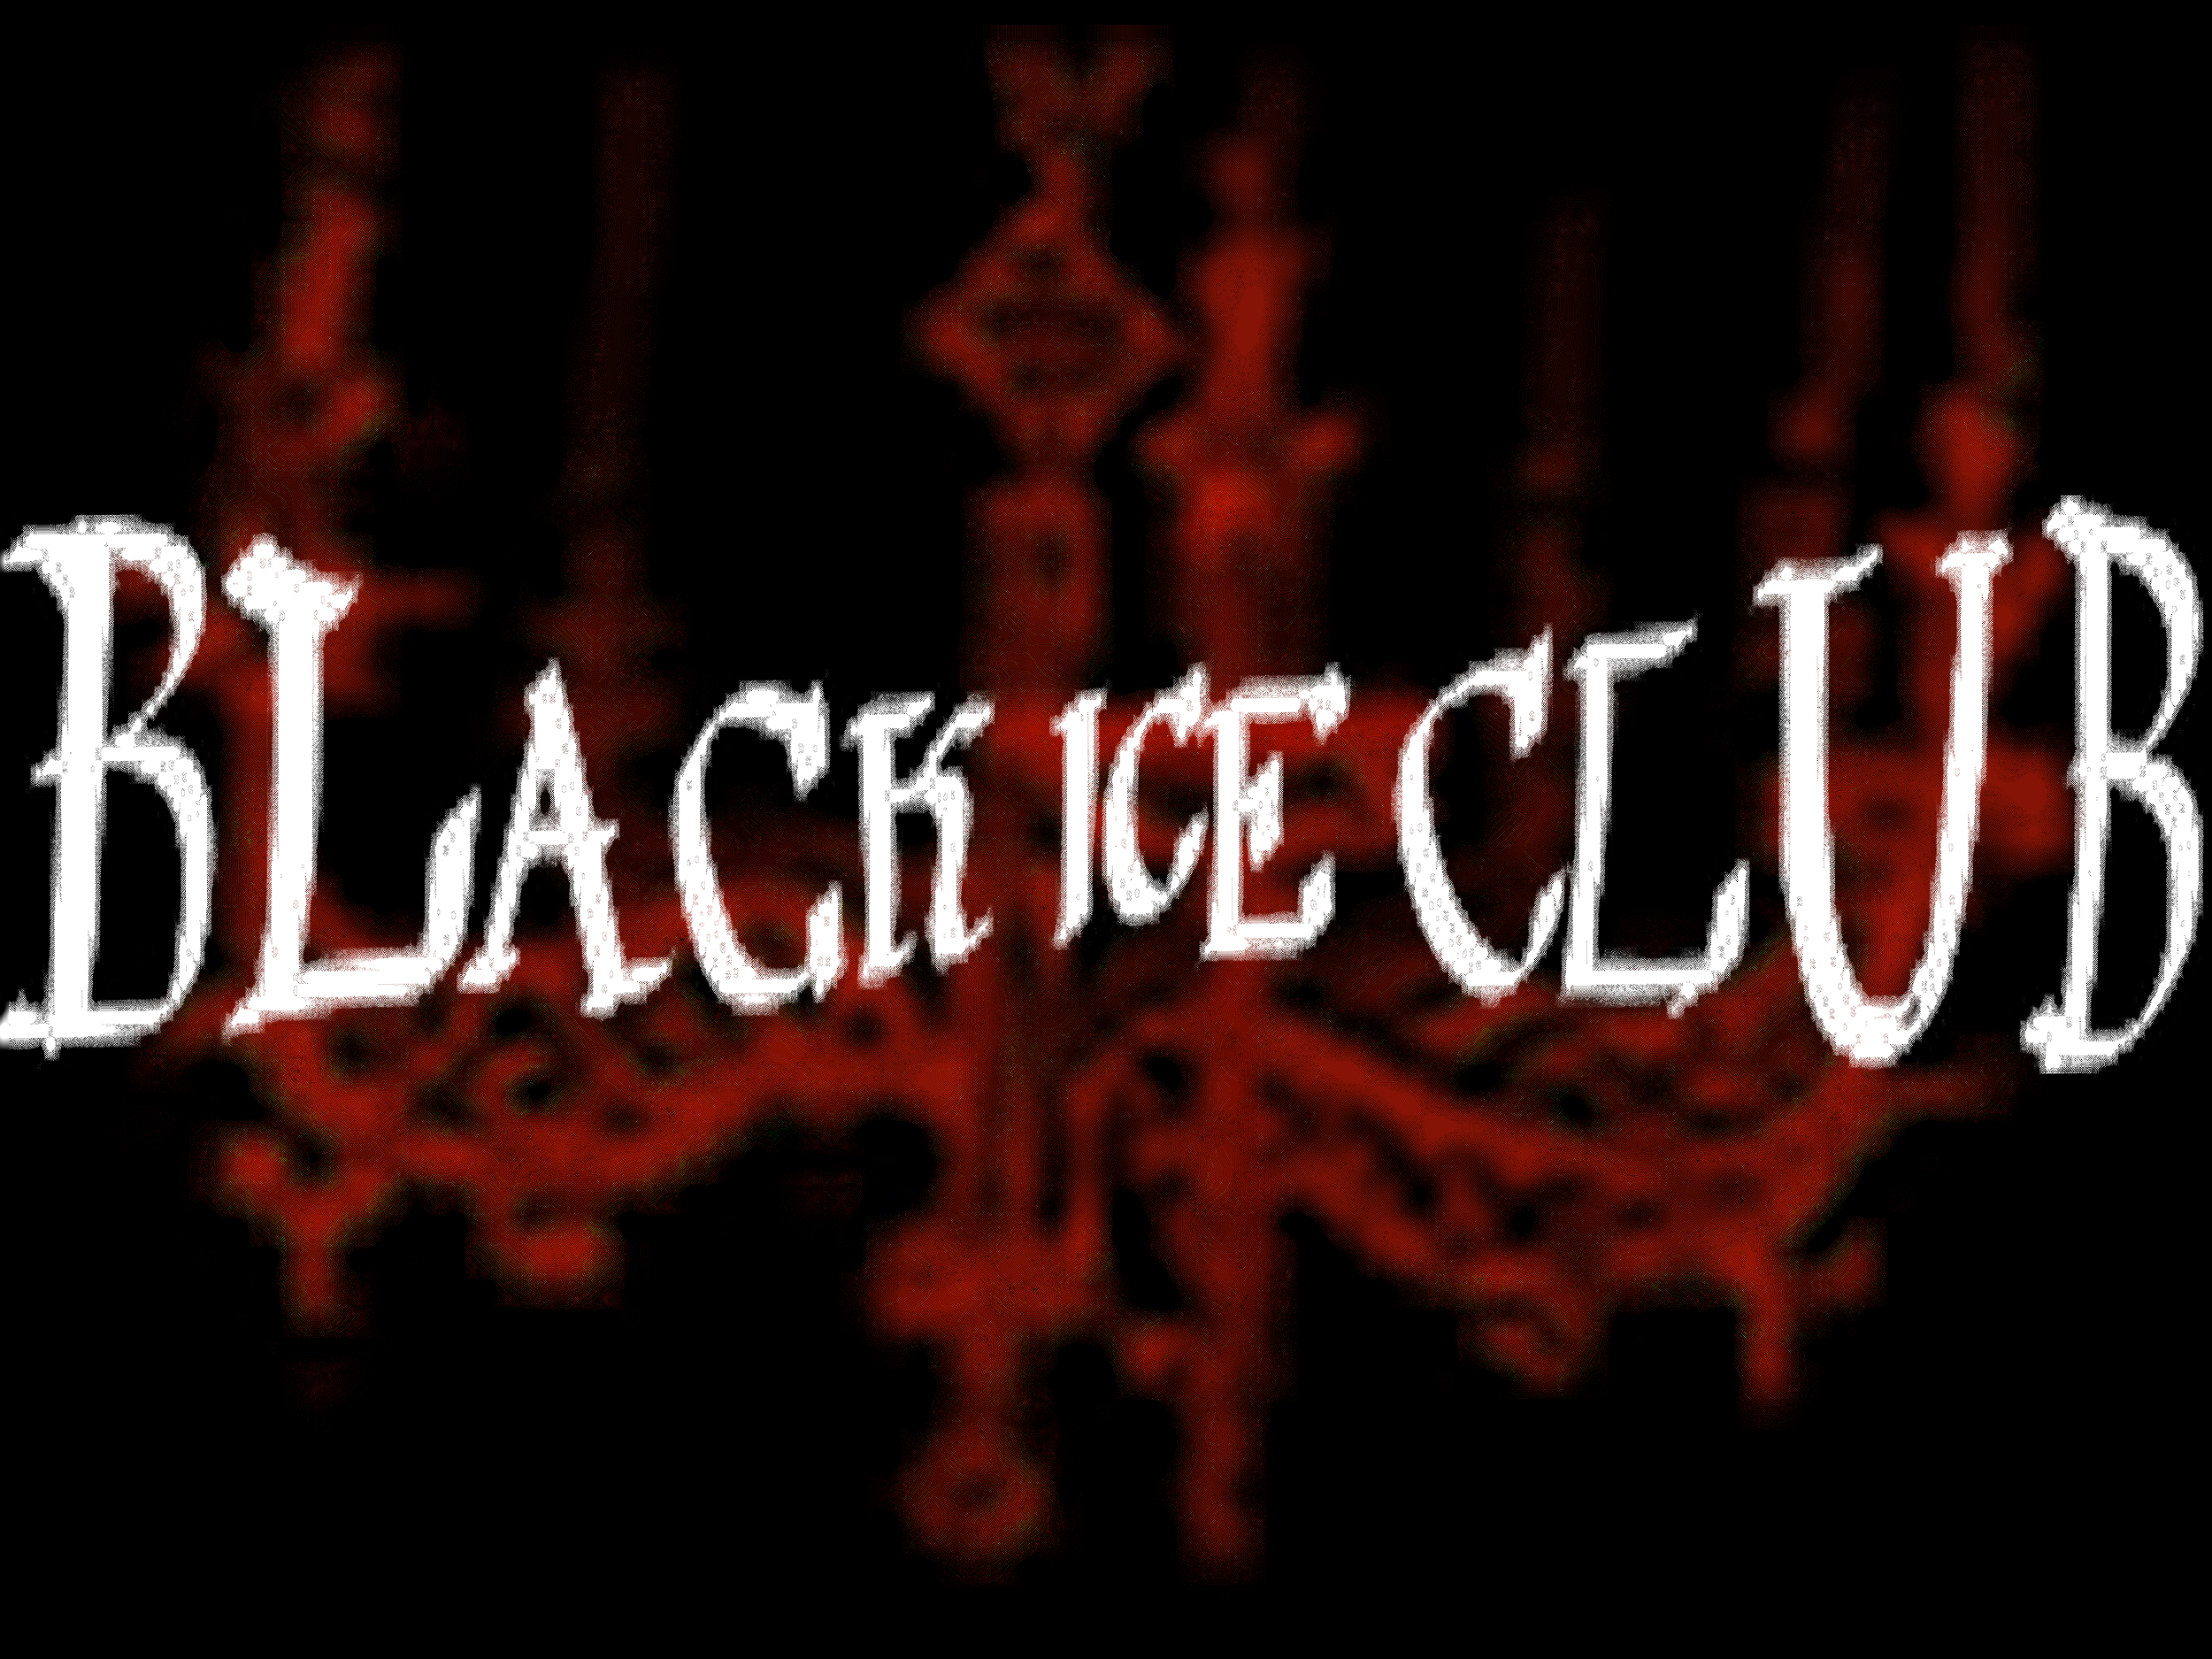 an out of focus red chandelier with a logo reading 'BLACK ICE CLUB' in white over top